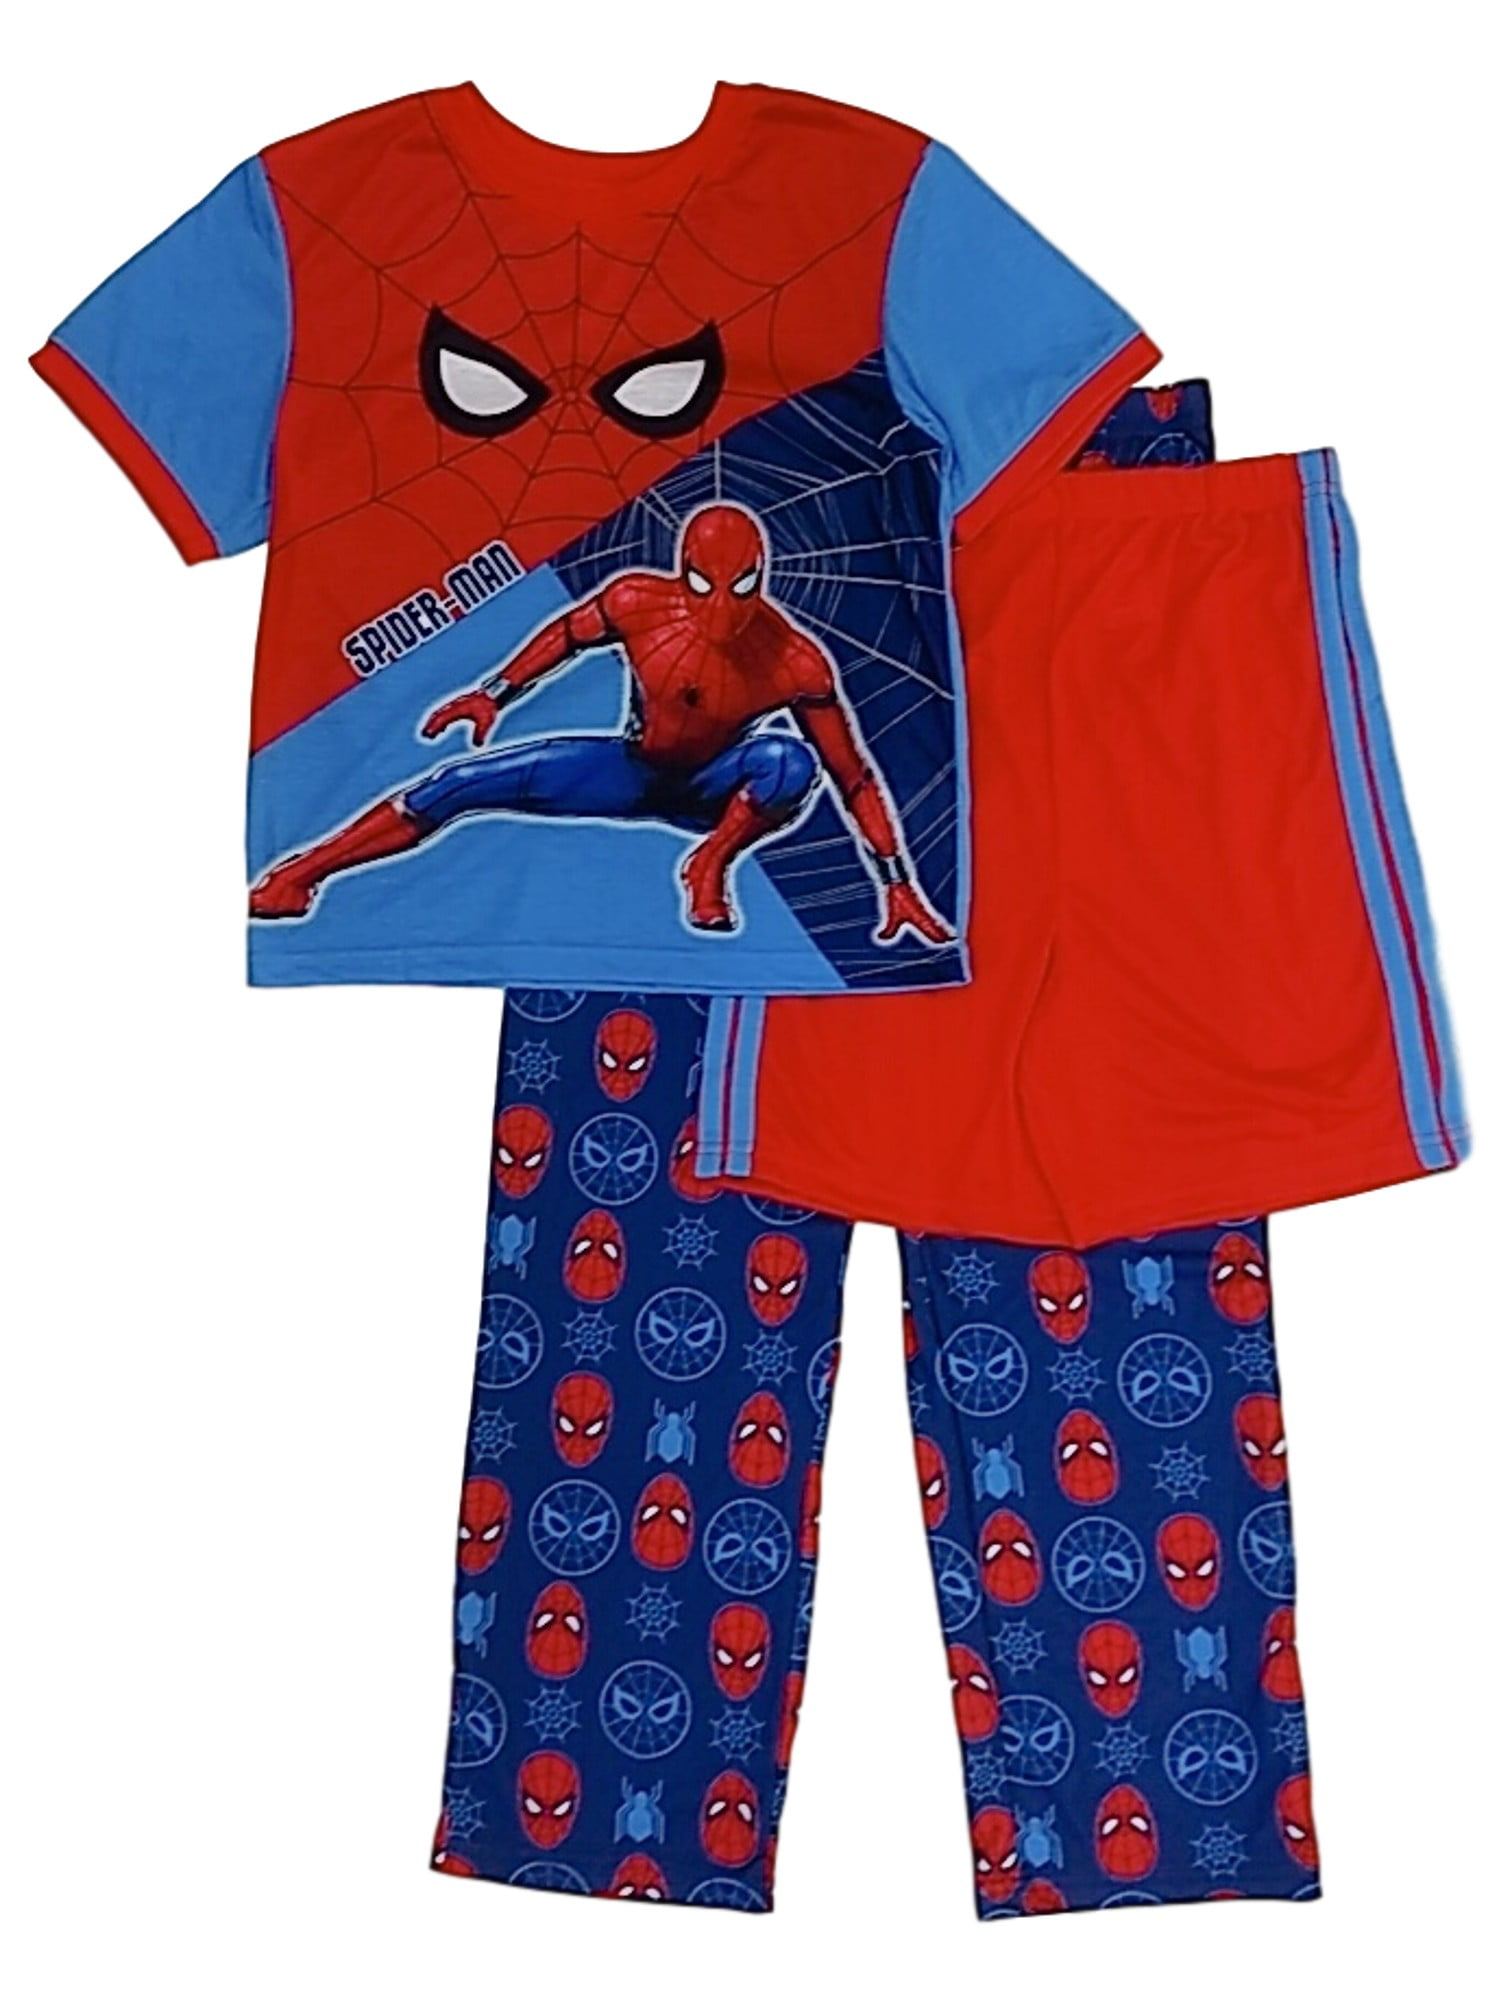 Boys Official Marvel Spiderman Summer Shorty Spidey Pyjamas 3 to 10 Years 